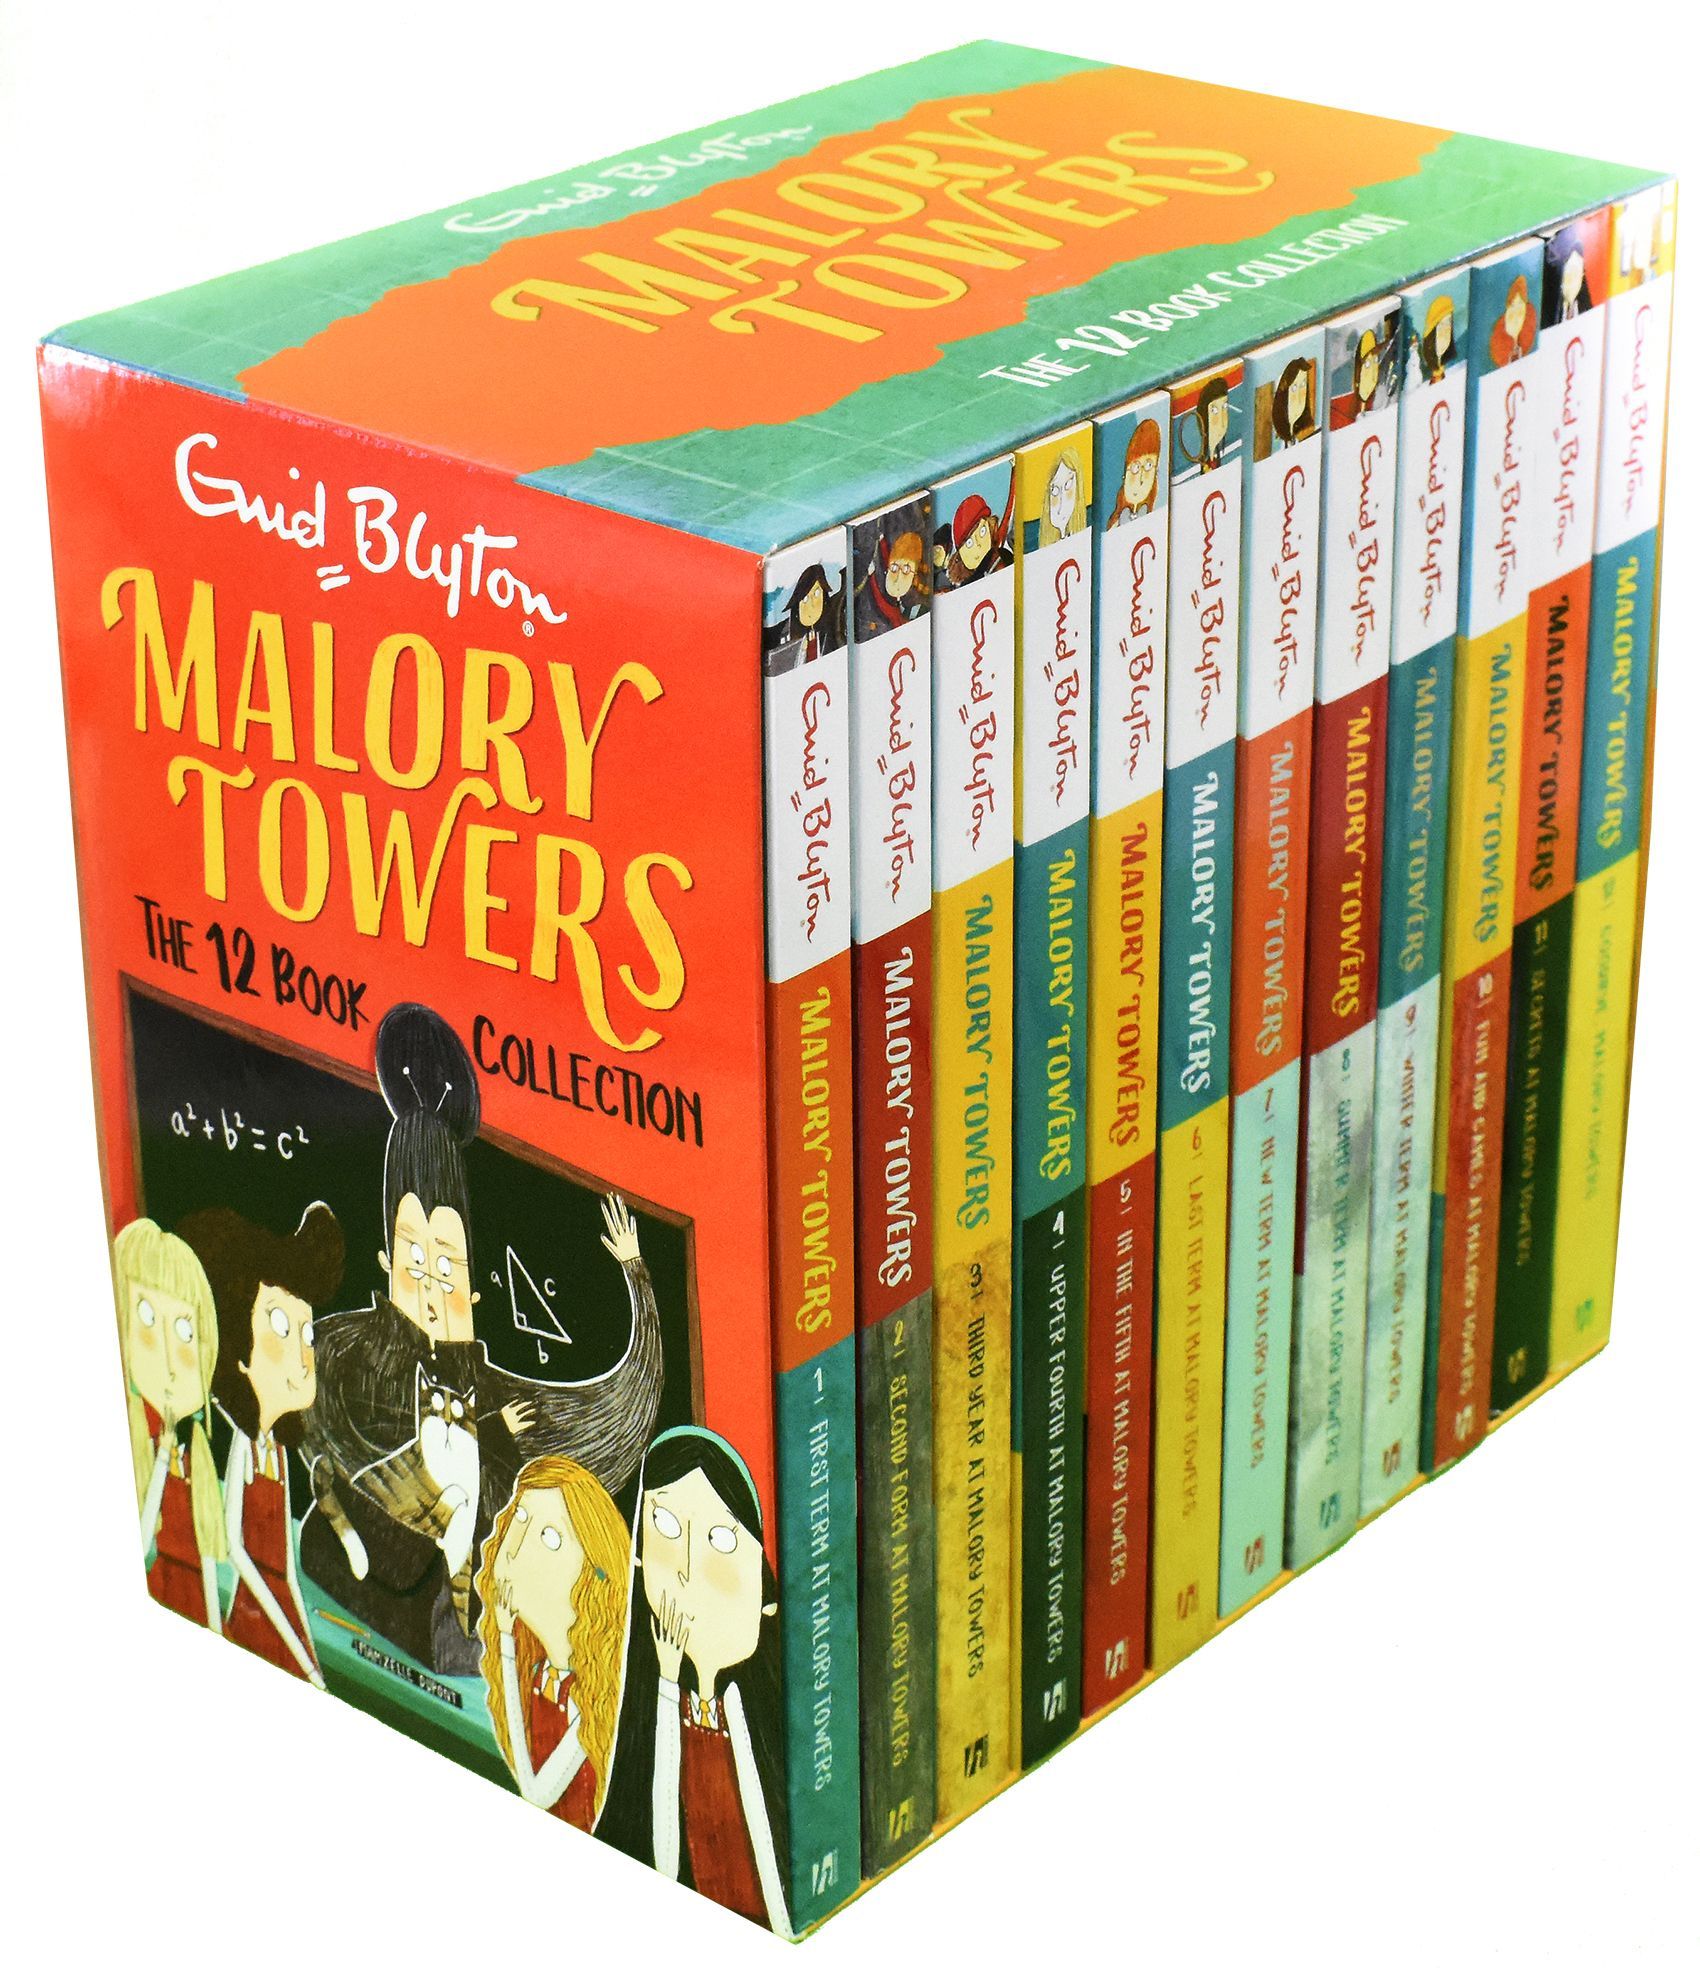 Malory Towers 12 Books Children Collection Box Set Paperback By Enid Blyton - St Stephens Books